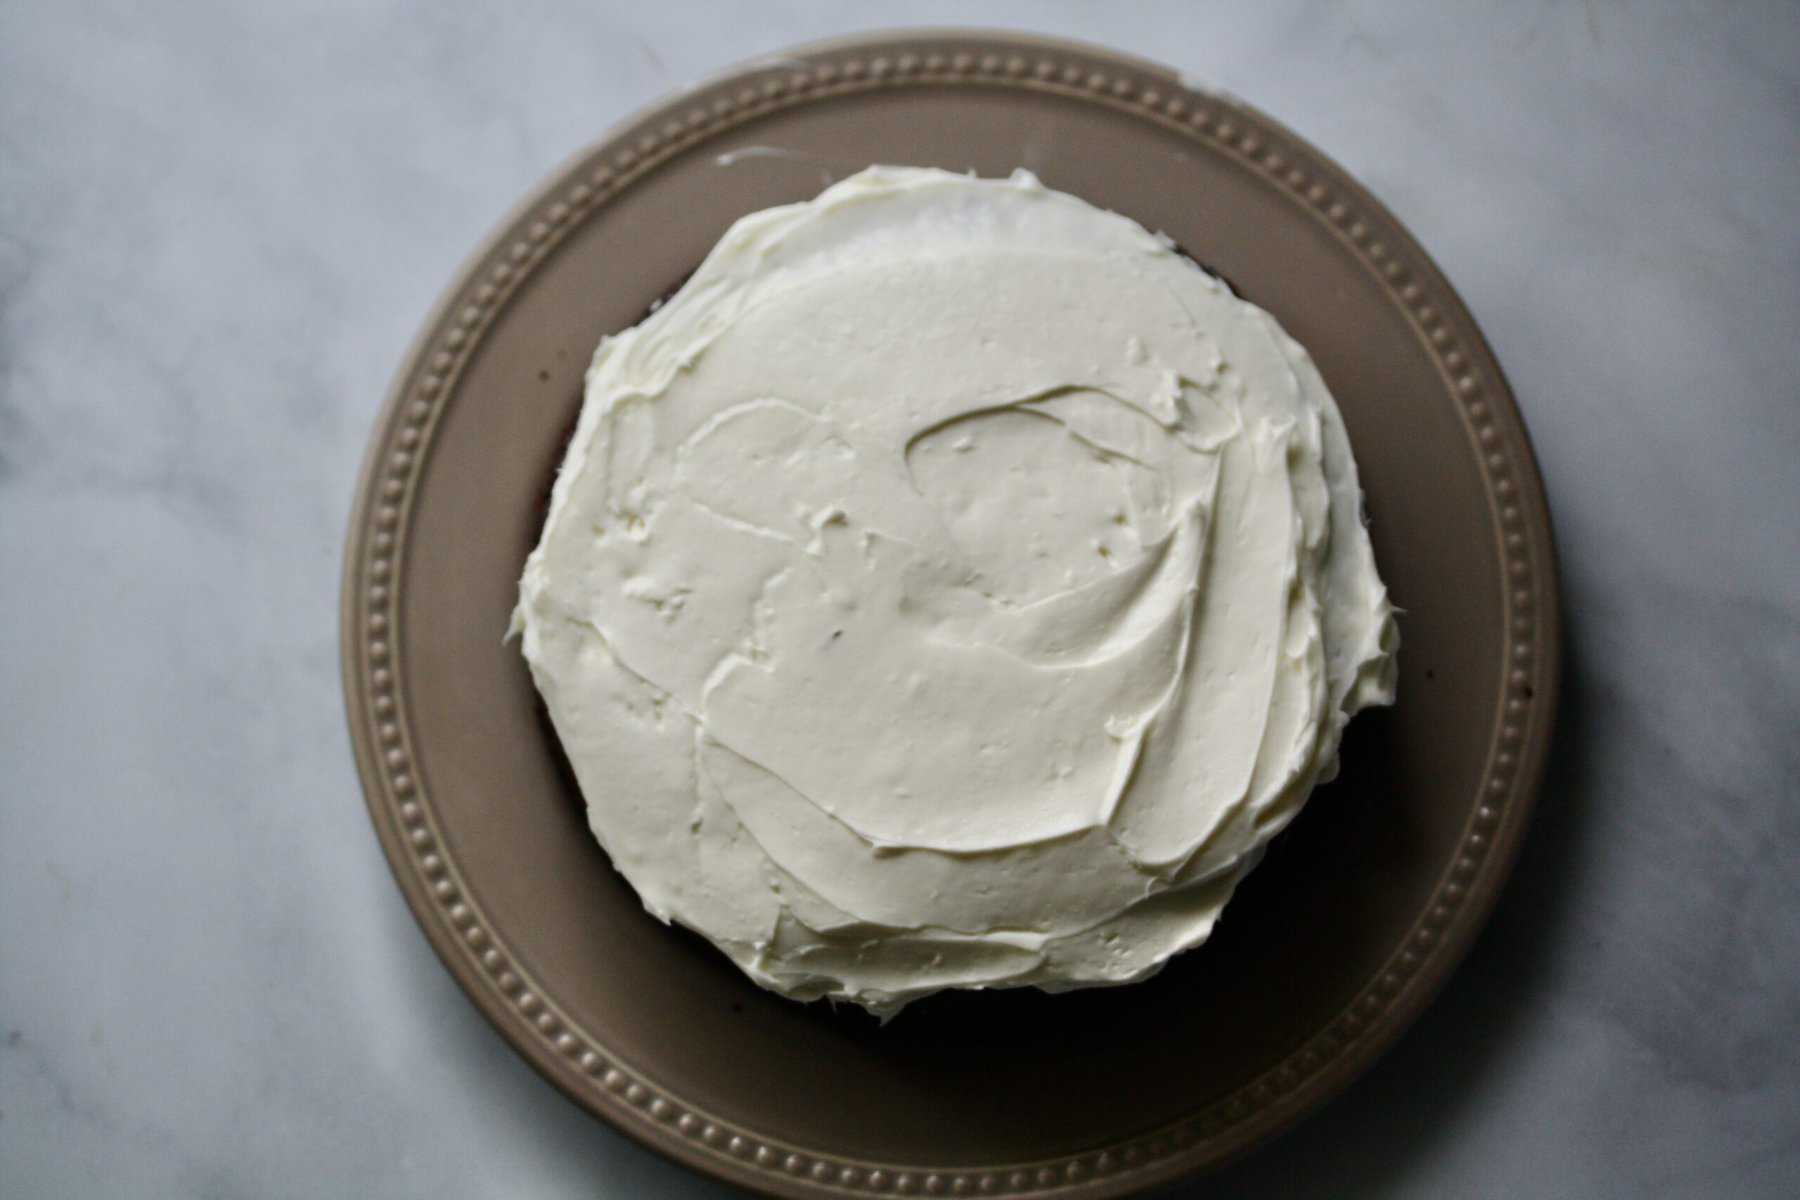 A gluten-free stout cake is iced with cream cheese frosting.